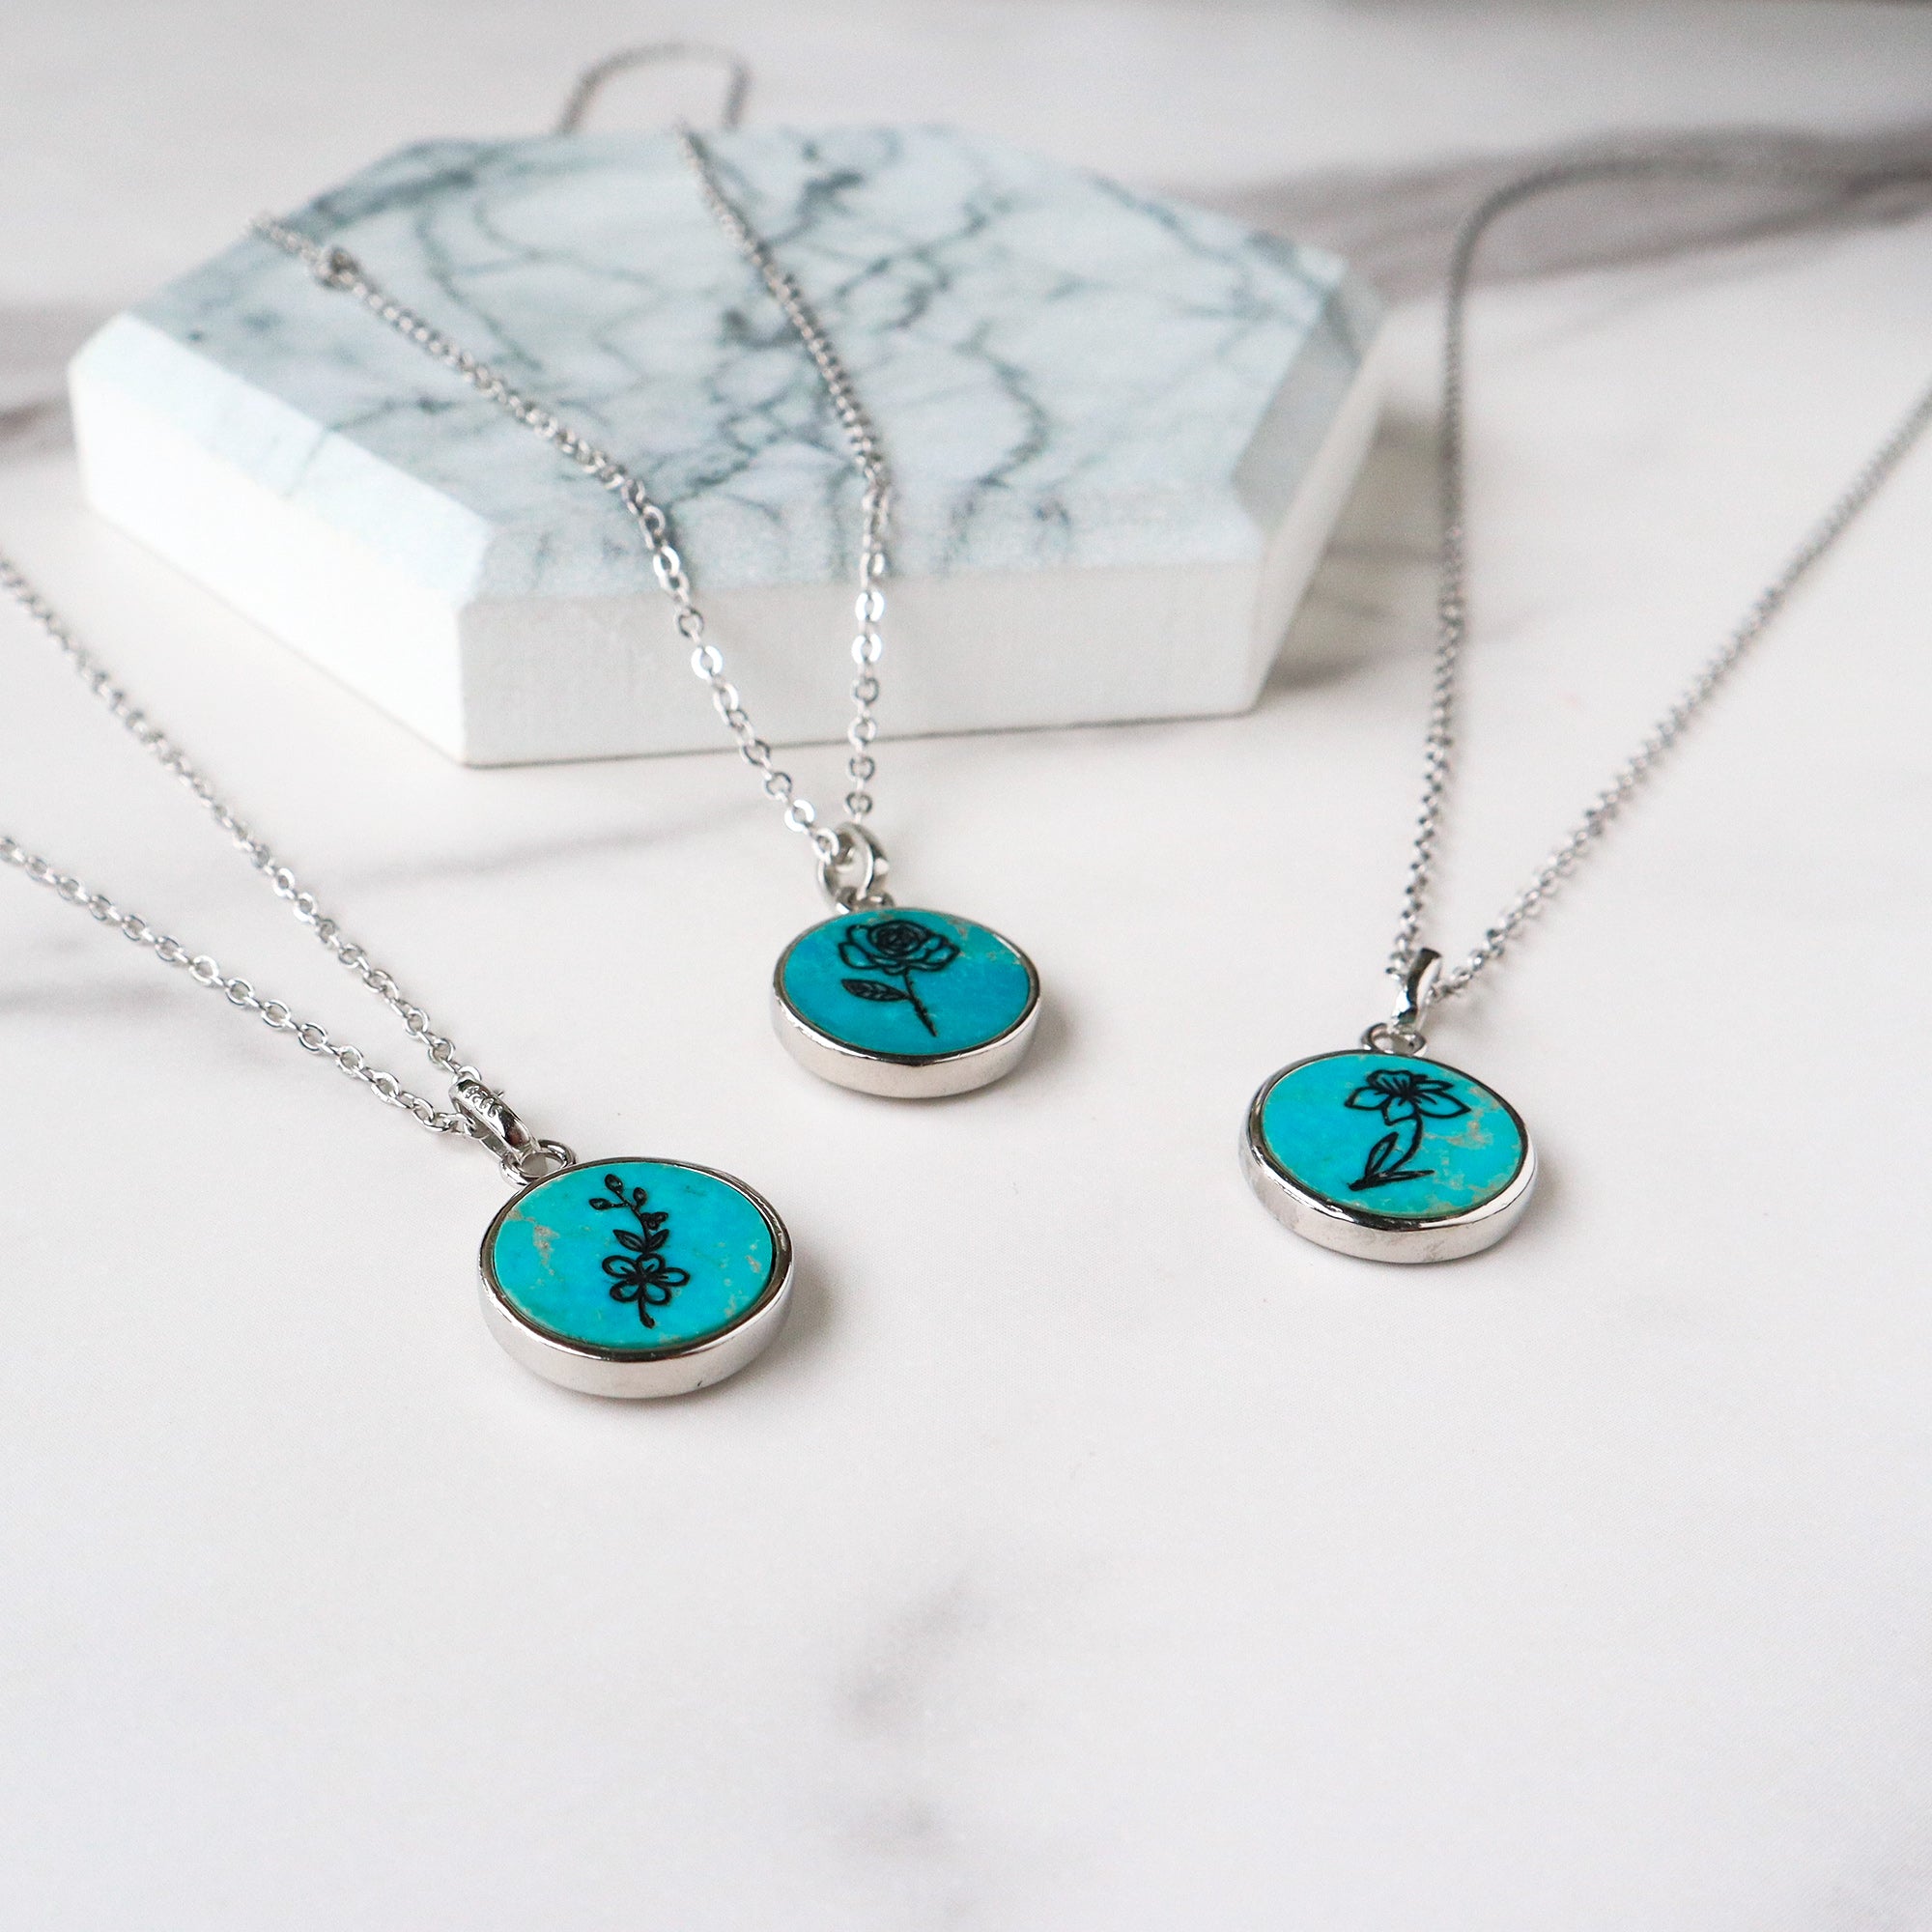 Silver Round Natural Turquoise Carved Birth Month Flower Pendant Necklace, Gemstone Coin Jewelry KZ013